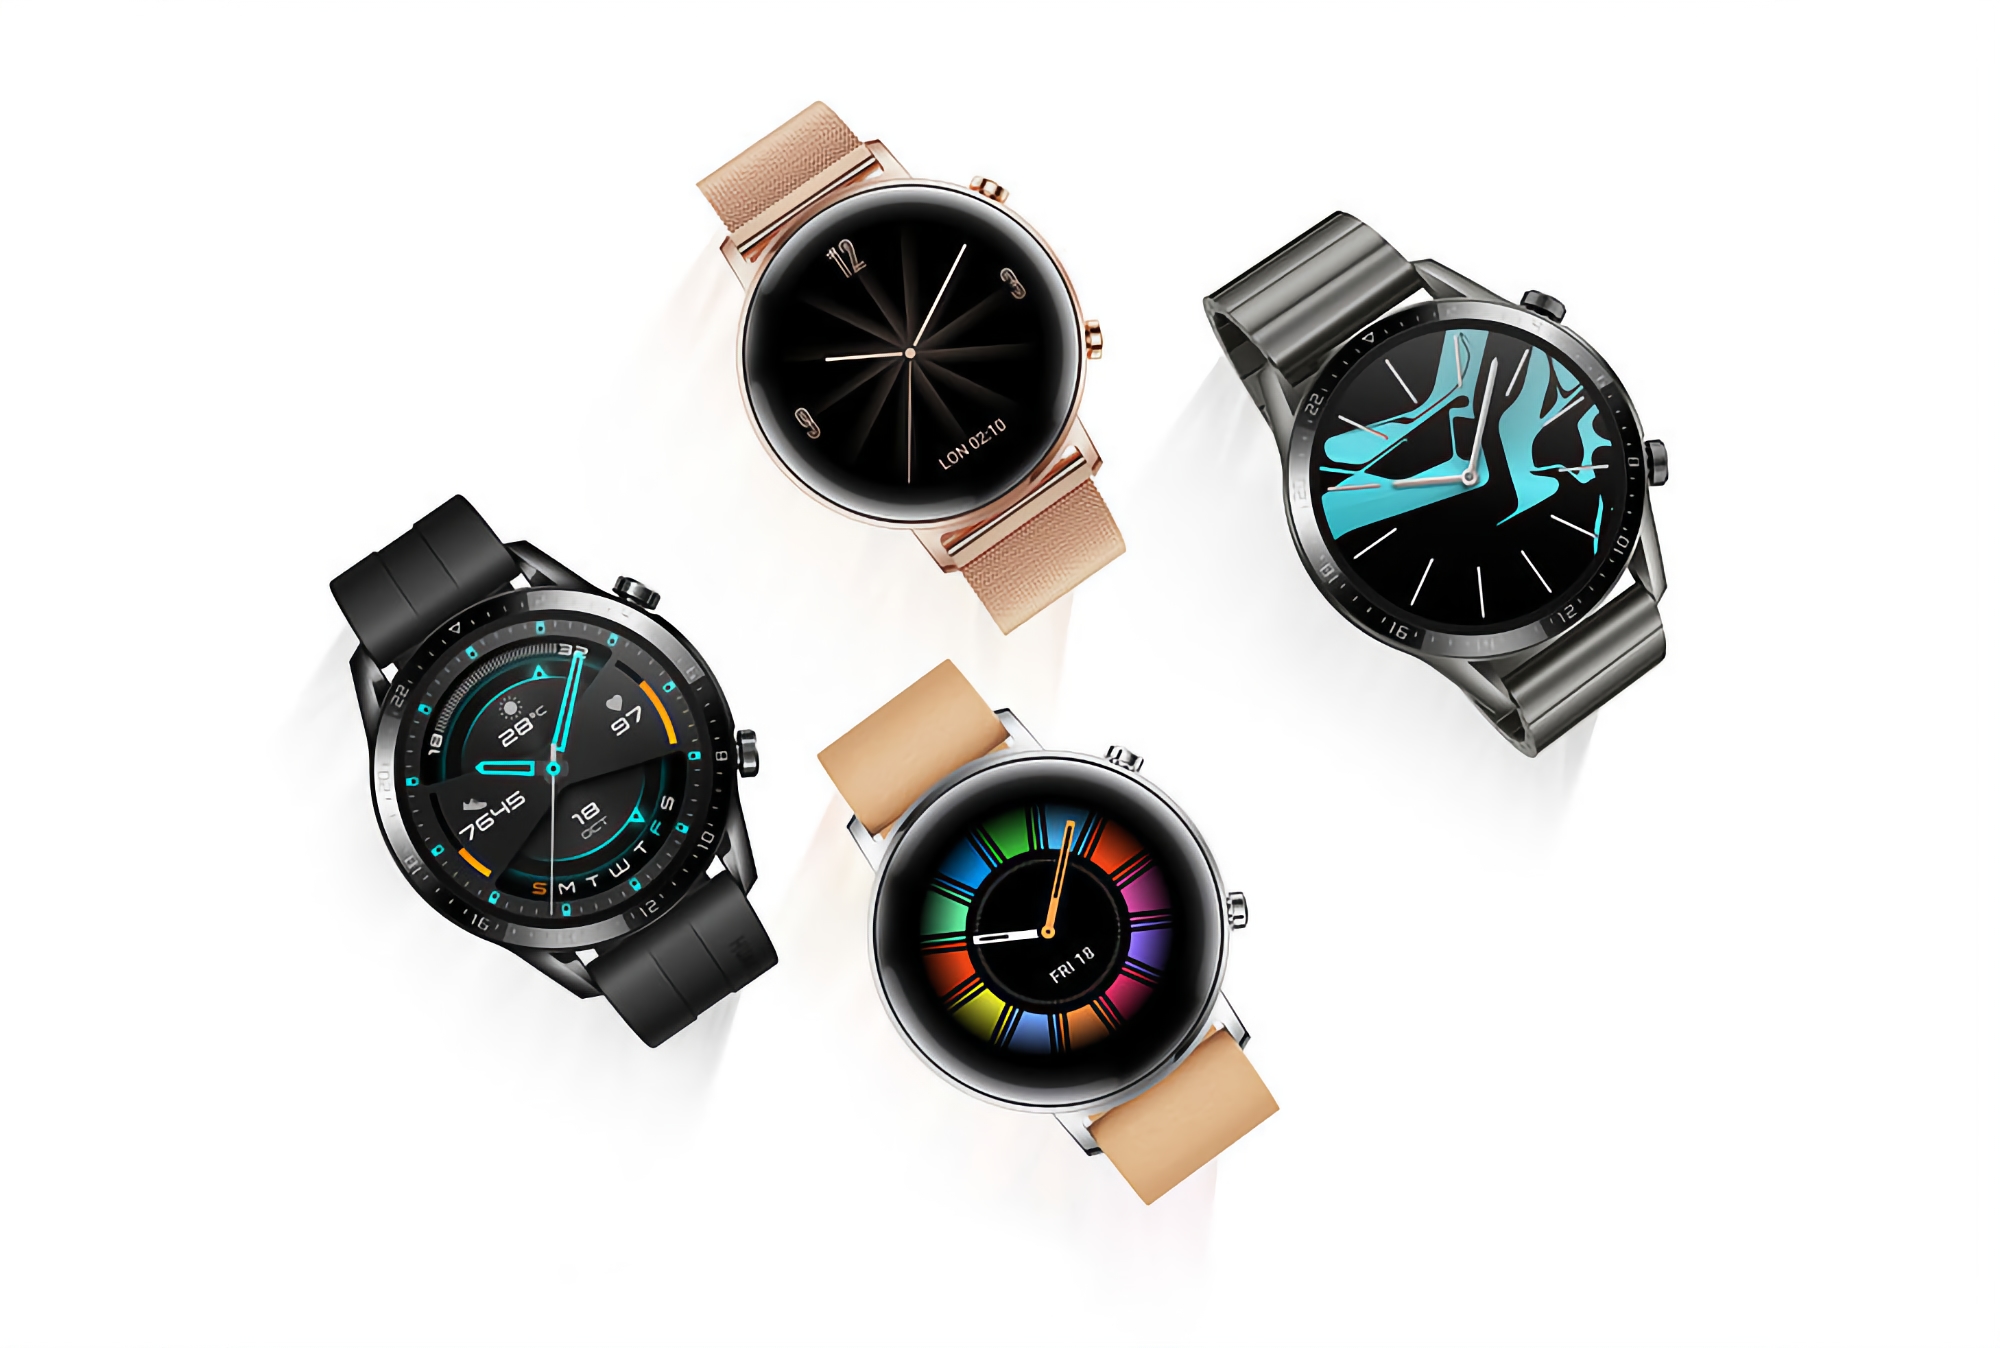 Huawei Watch GT 2 received update 11.0.16.10: Here's what's new and when to expect the OTA